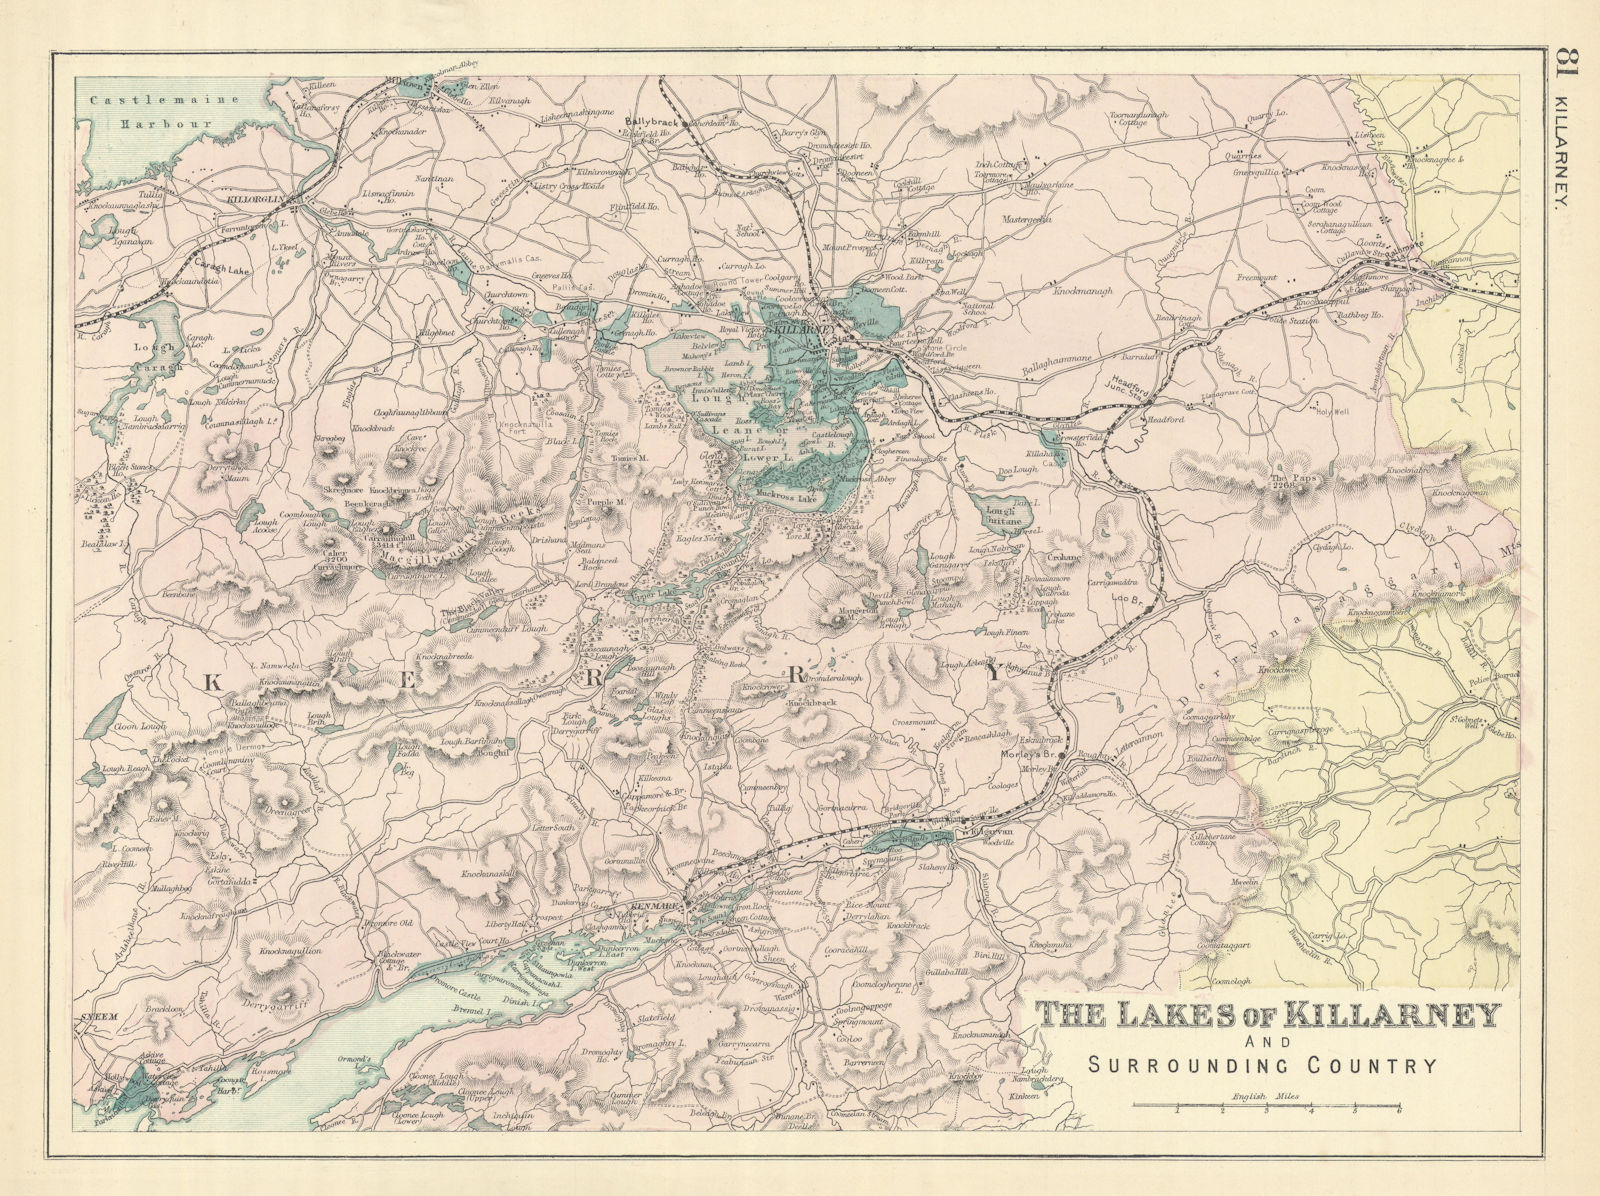 Associate Product KILLARNEY LAKES Kerry Kenmare Ireland antique map by GW BACON 1898 old